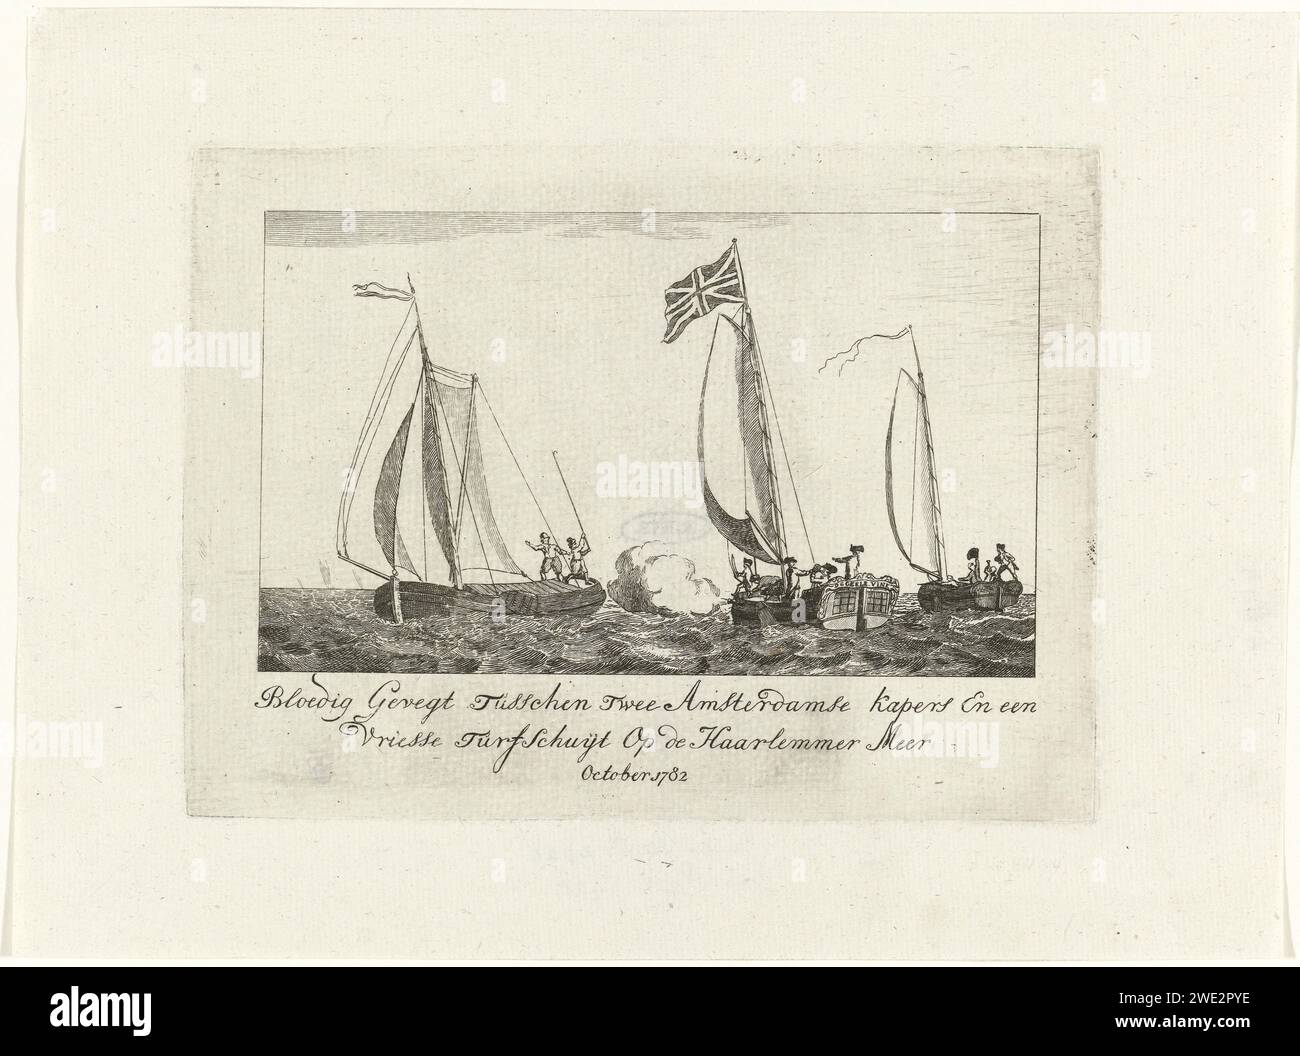 Attack of Amsterdam's loose bulbs on a Frisian Turfschip, 1782, Anonymous, 1782 print Attack committed by three Amsterdam loose bulbs (Geelvink, Van Welderen and Peterson) with their yacht the yellow tick on a Frisian Turfschip on the Haarlemmermeer, October 1782. The British flag was hoisted on the yacht. Northern Netherlands paper etching battle (+ naval force) Haarlemmermeer Stock Photo